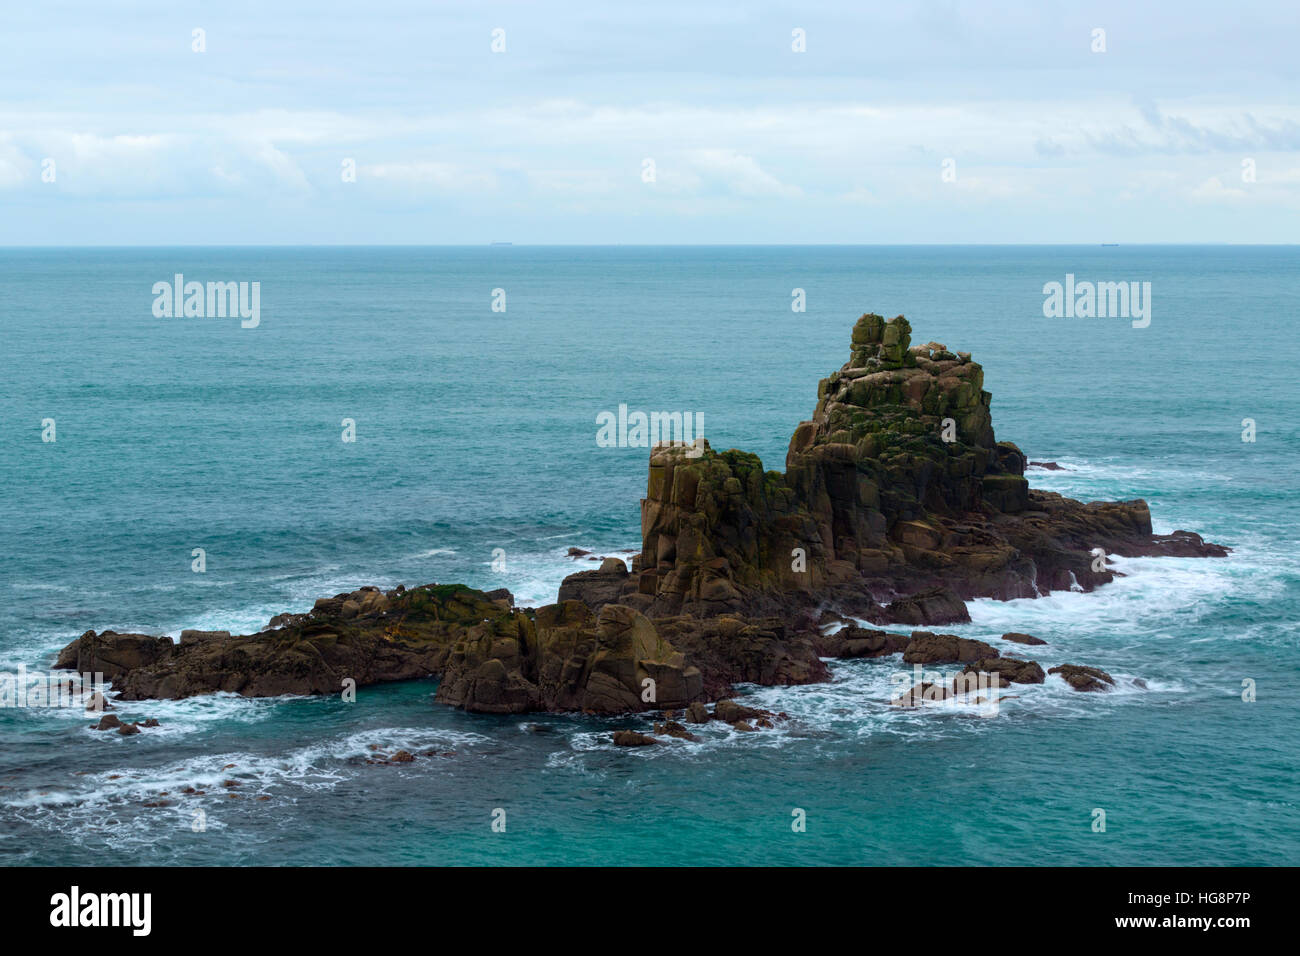 The armed knight iconic rock formation at Lands End in Cornwall Stock Photo